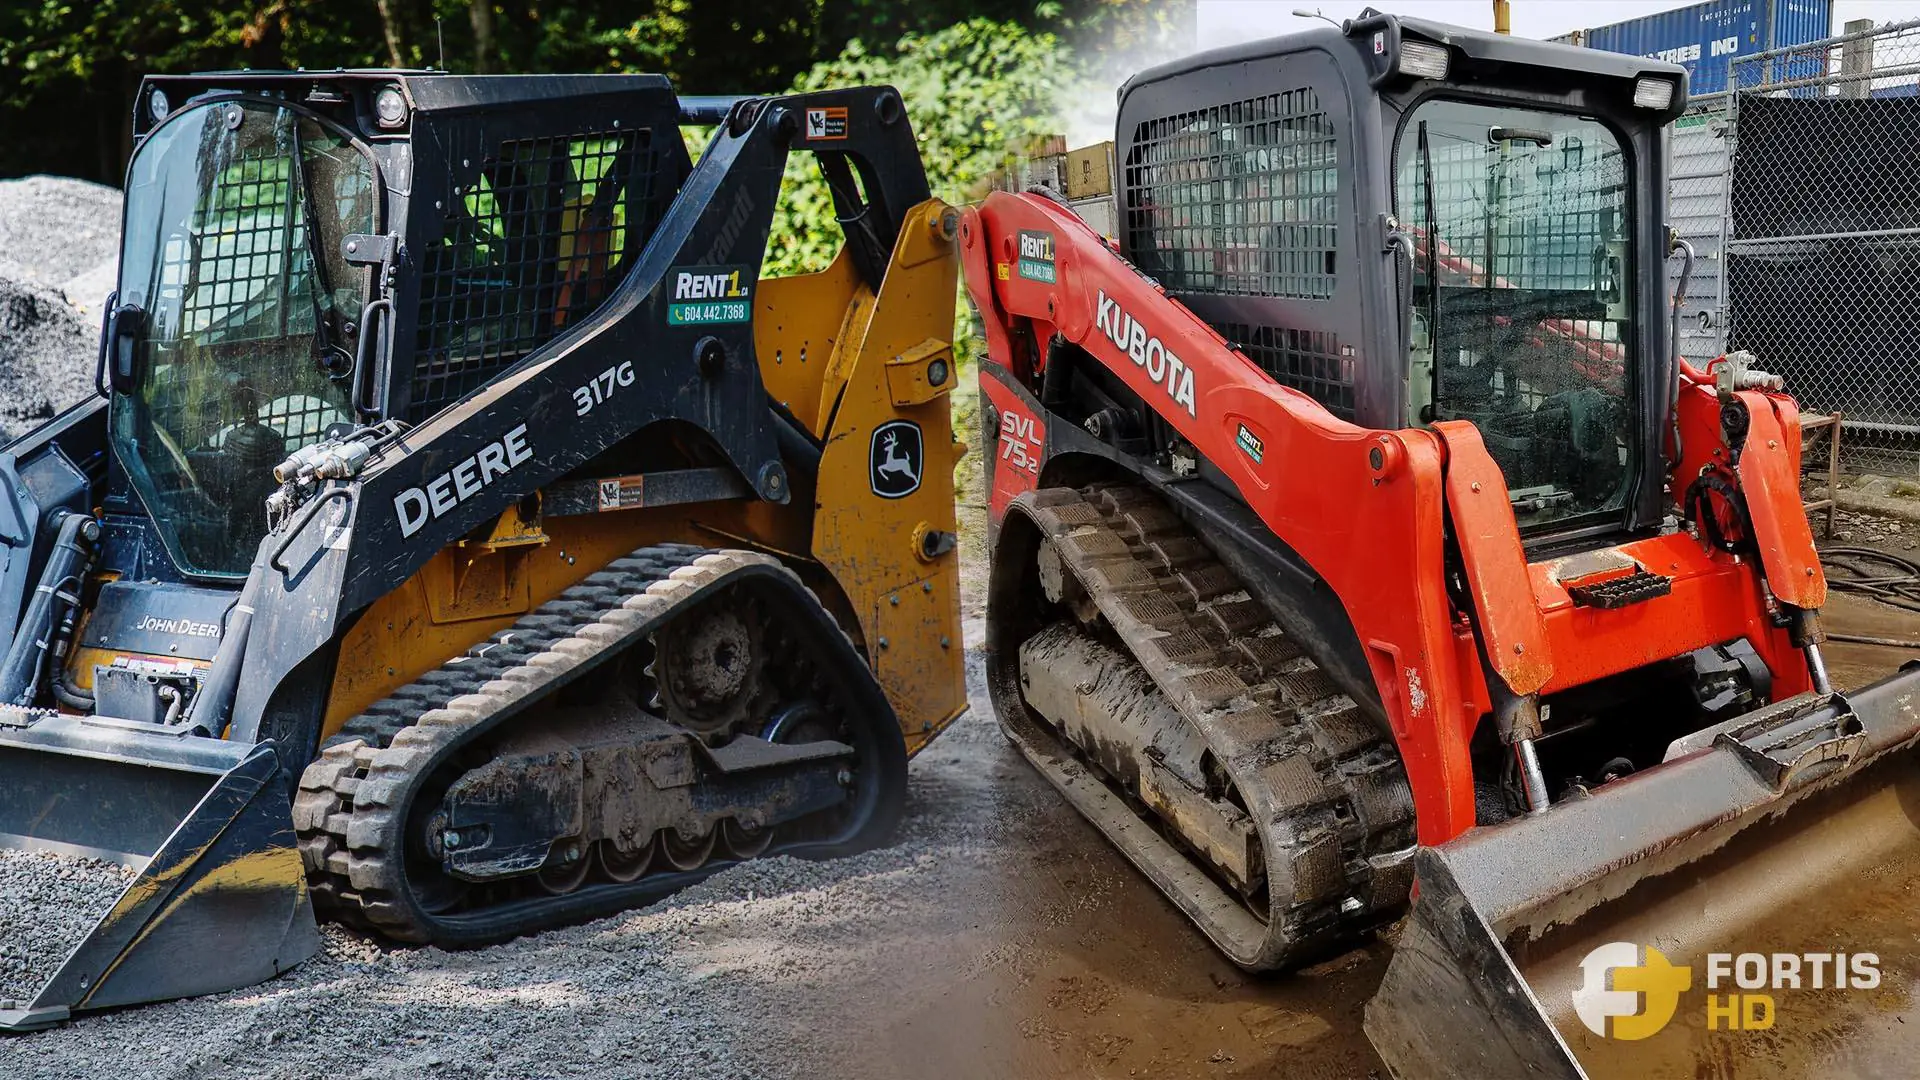 A John Deere 317G and a Kubota SVL75-2 compact track loaders side-by-side.